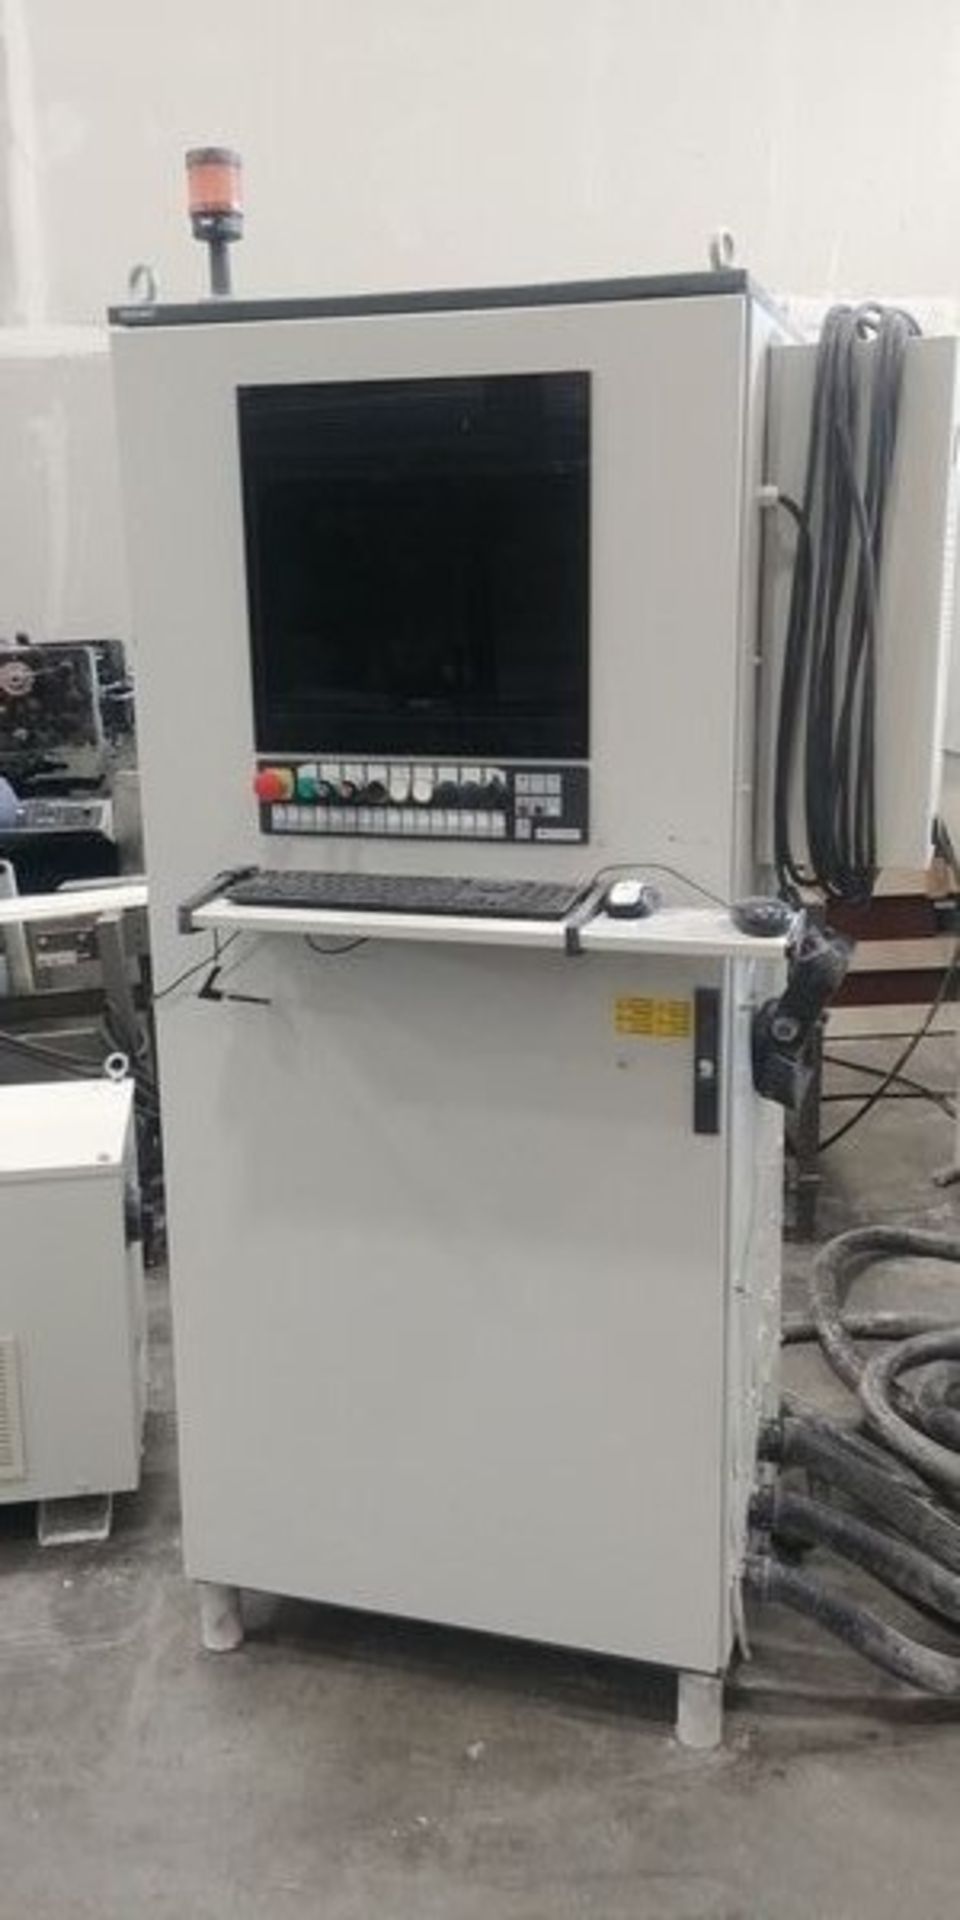 Intermac Master 33 Stone & Glass CNC Machine - Purchased New in 2014 - Image 2 of 7